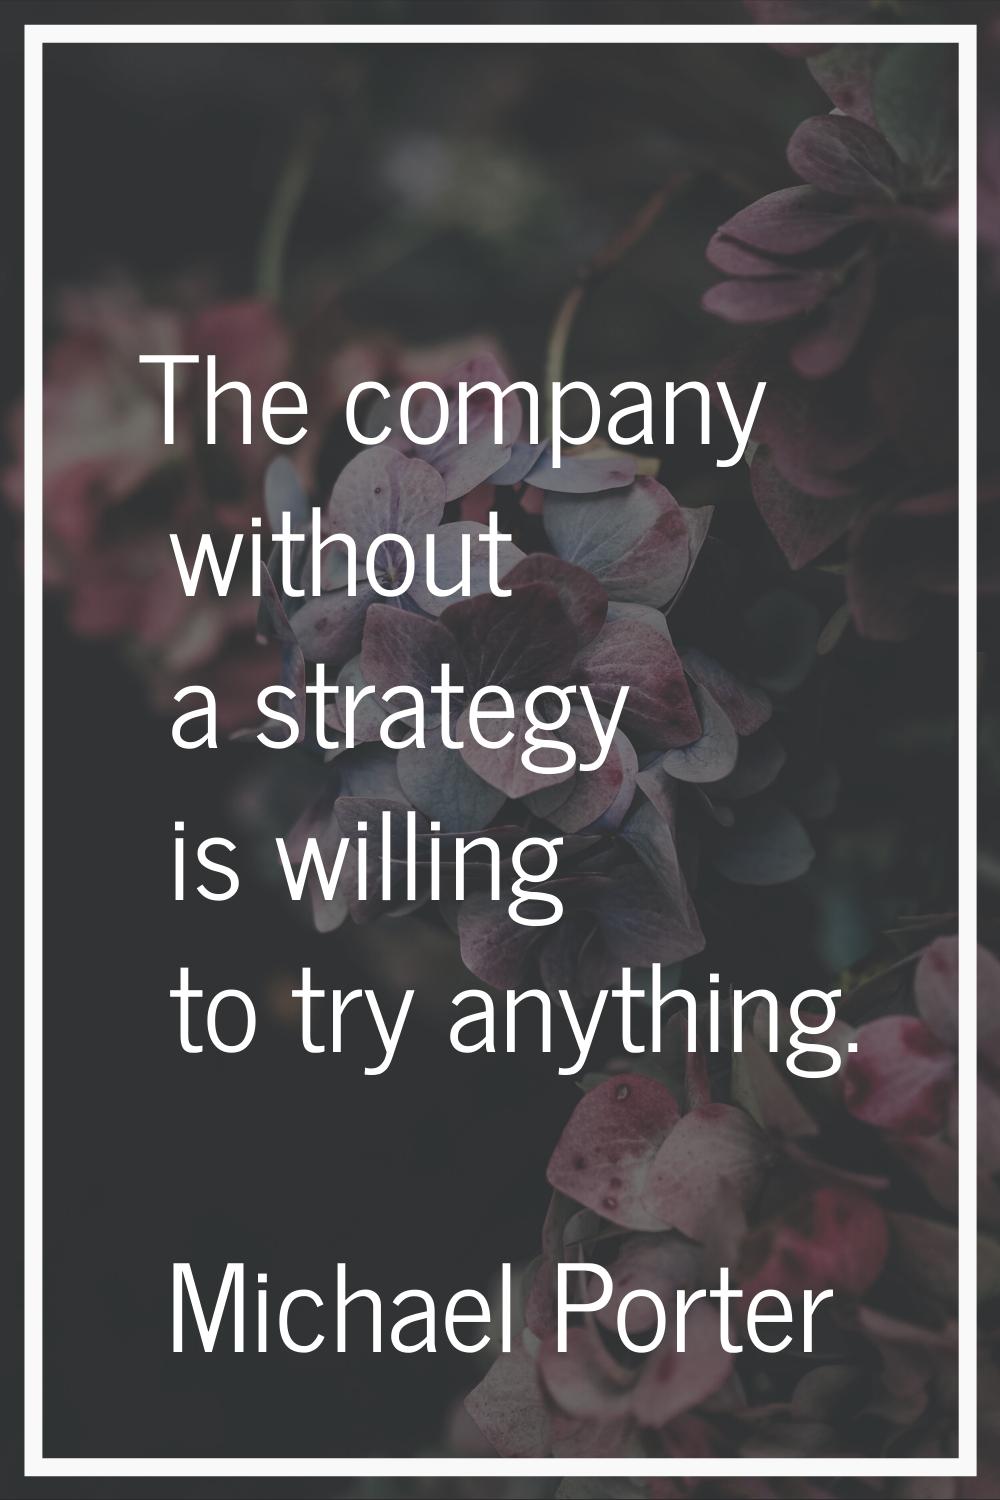 The company without a strategy is willing to try anything.